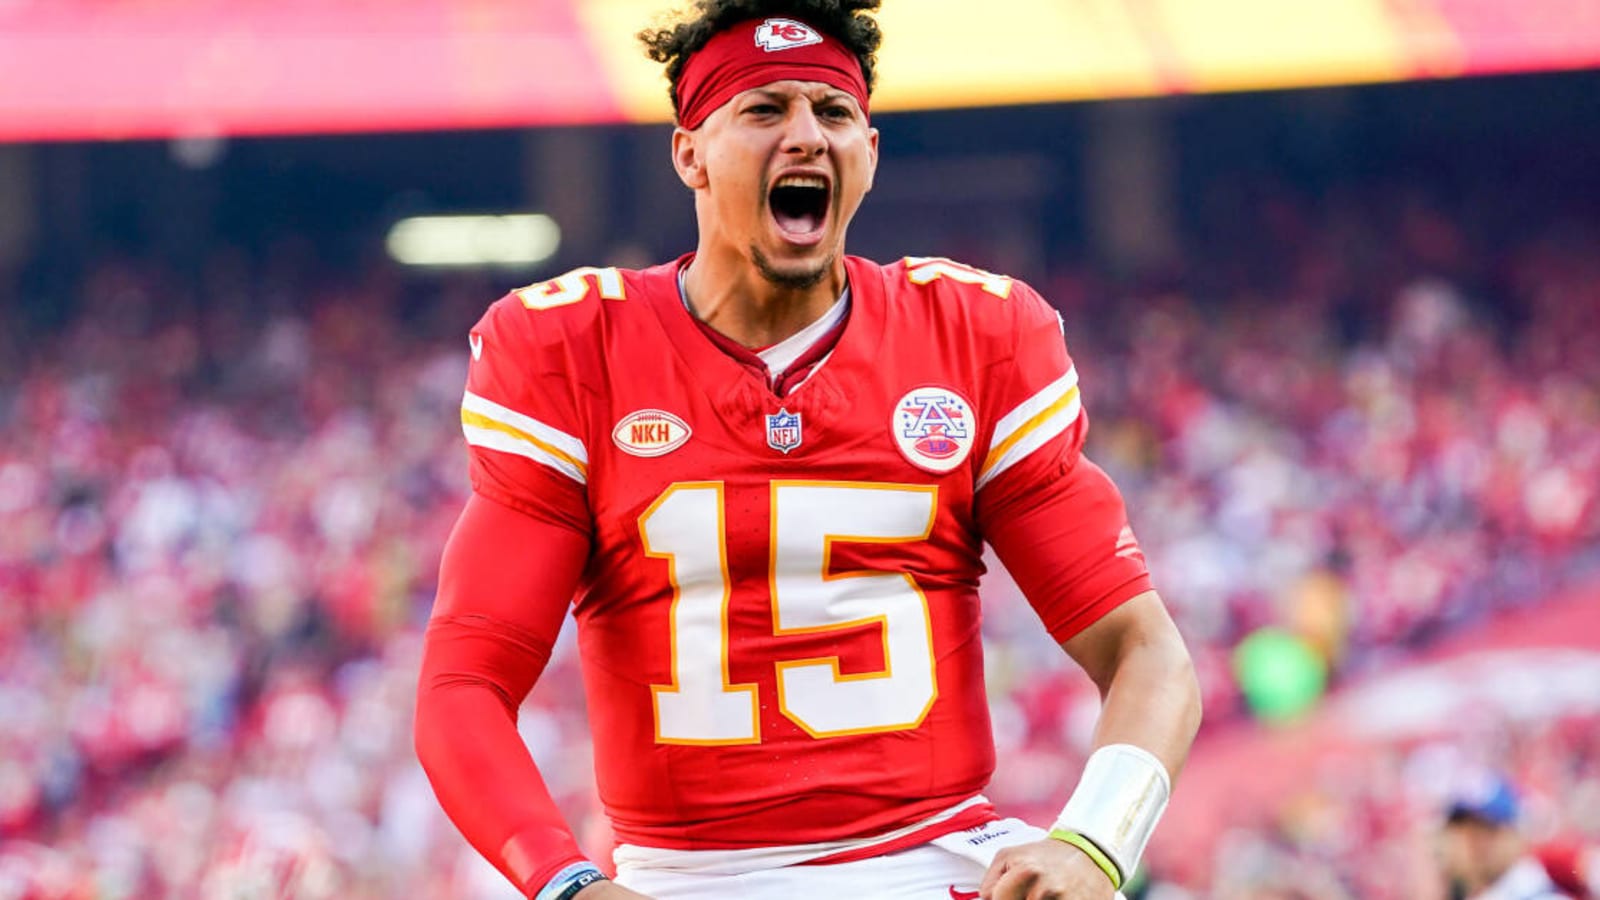 NFL Network hosts already forgetting how dominant Chiefs QB Patrick Mahomes is in September